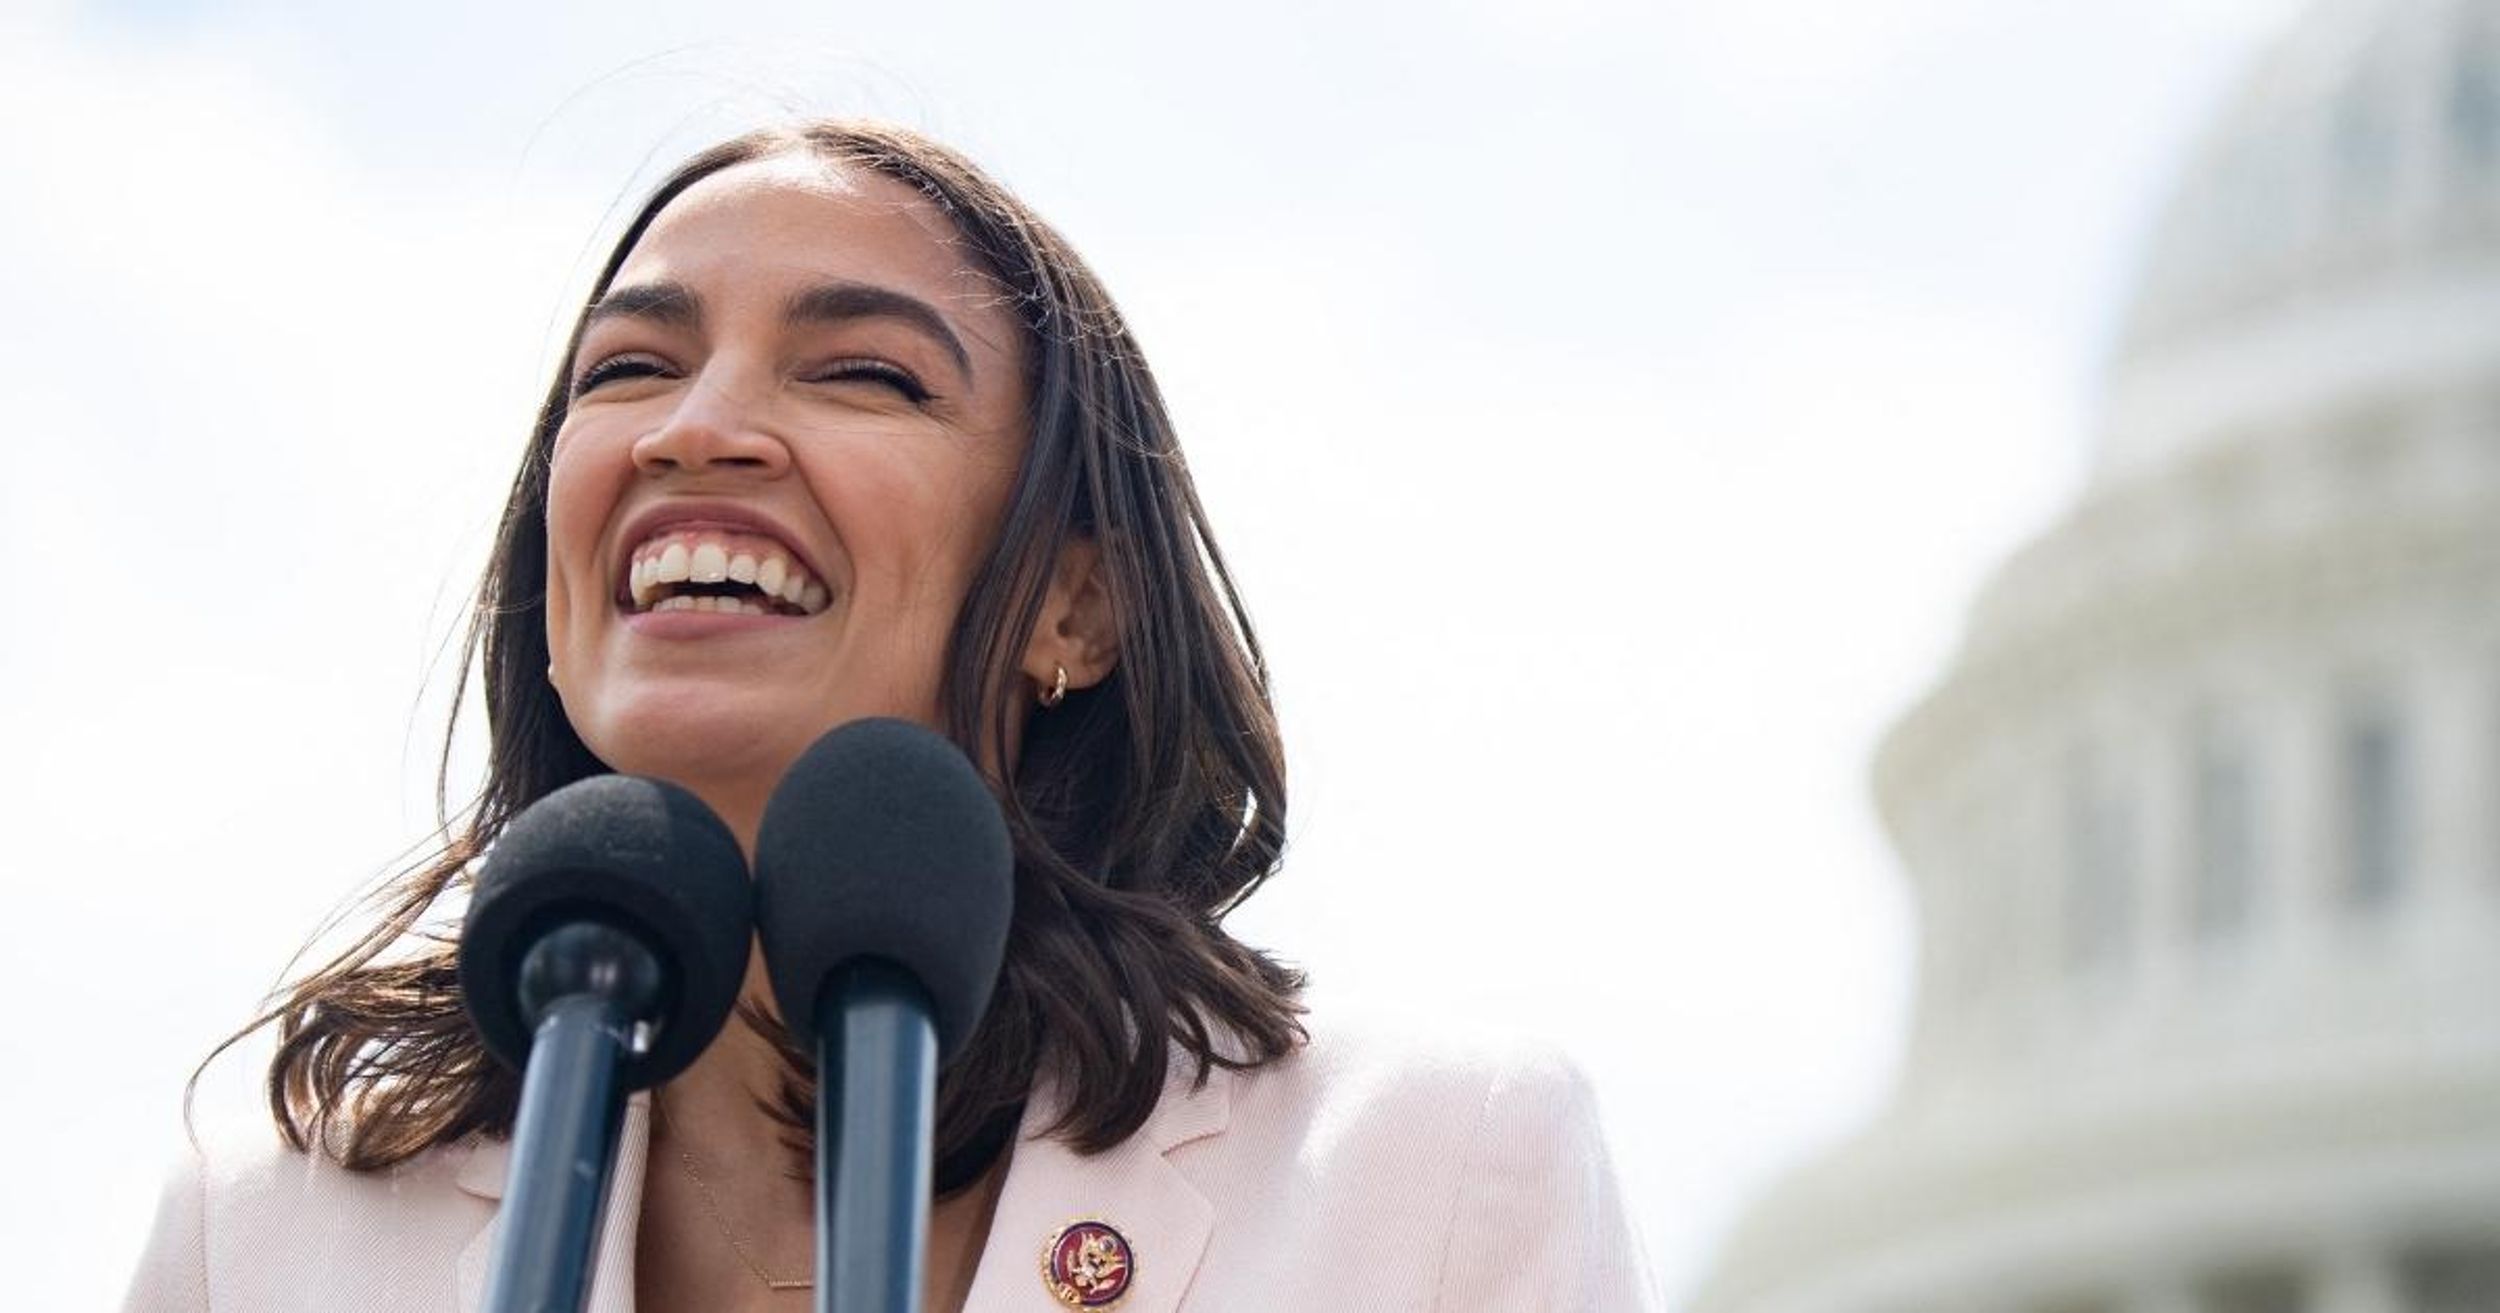 AOC Claps Back At Rightwinger Who Accused Her Of Neglecting Her Grandma While 'Living In Luxury'